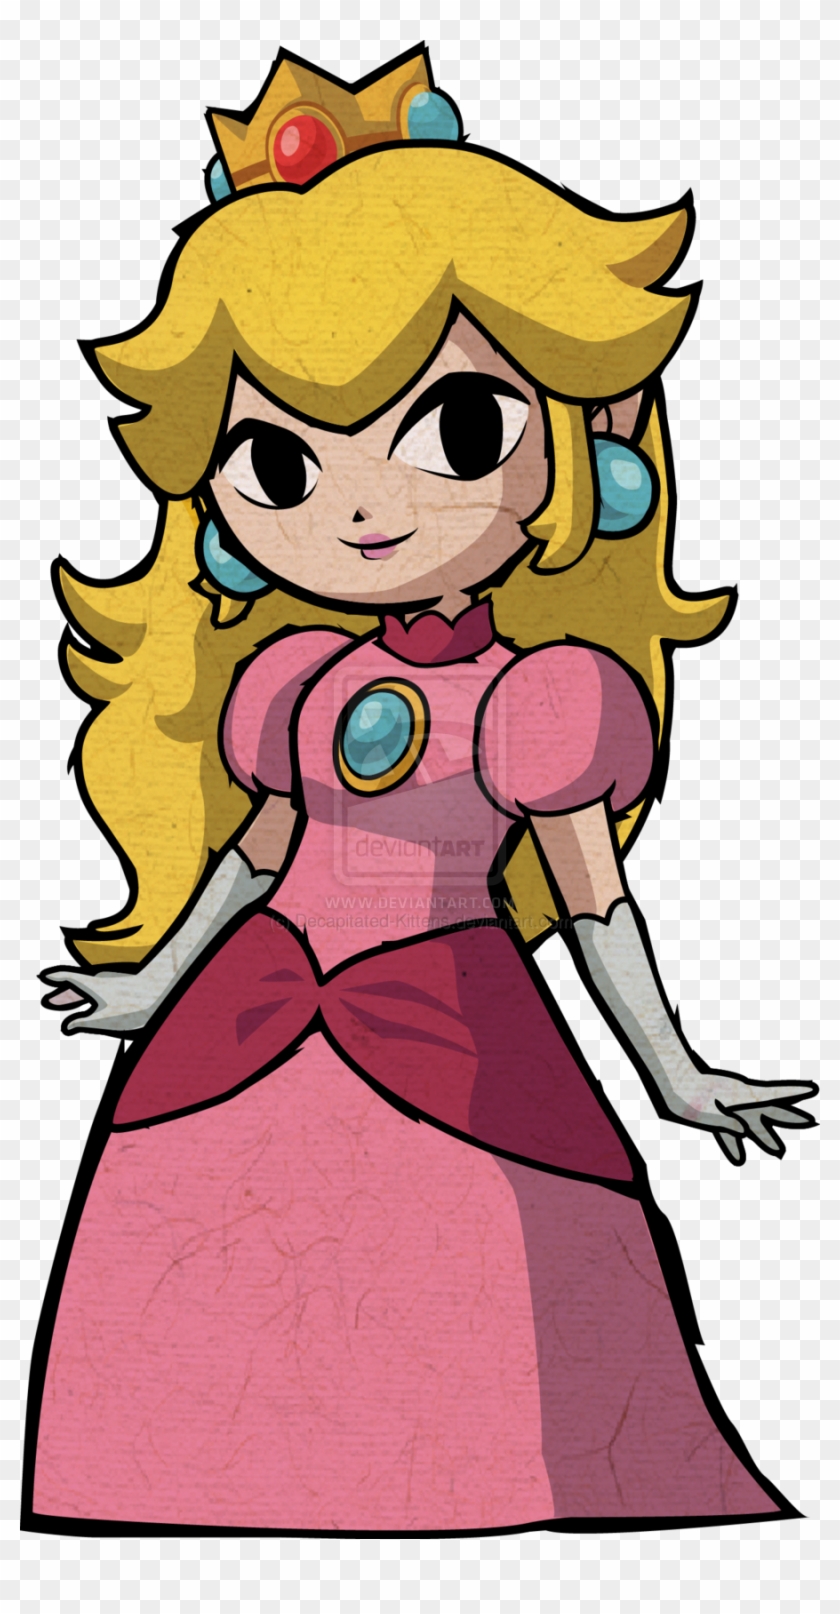 Princess Peach Drawn In The Wind Waker Style - Princess Zelda The Wind Waker #305659